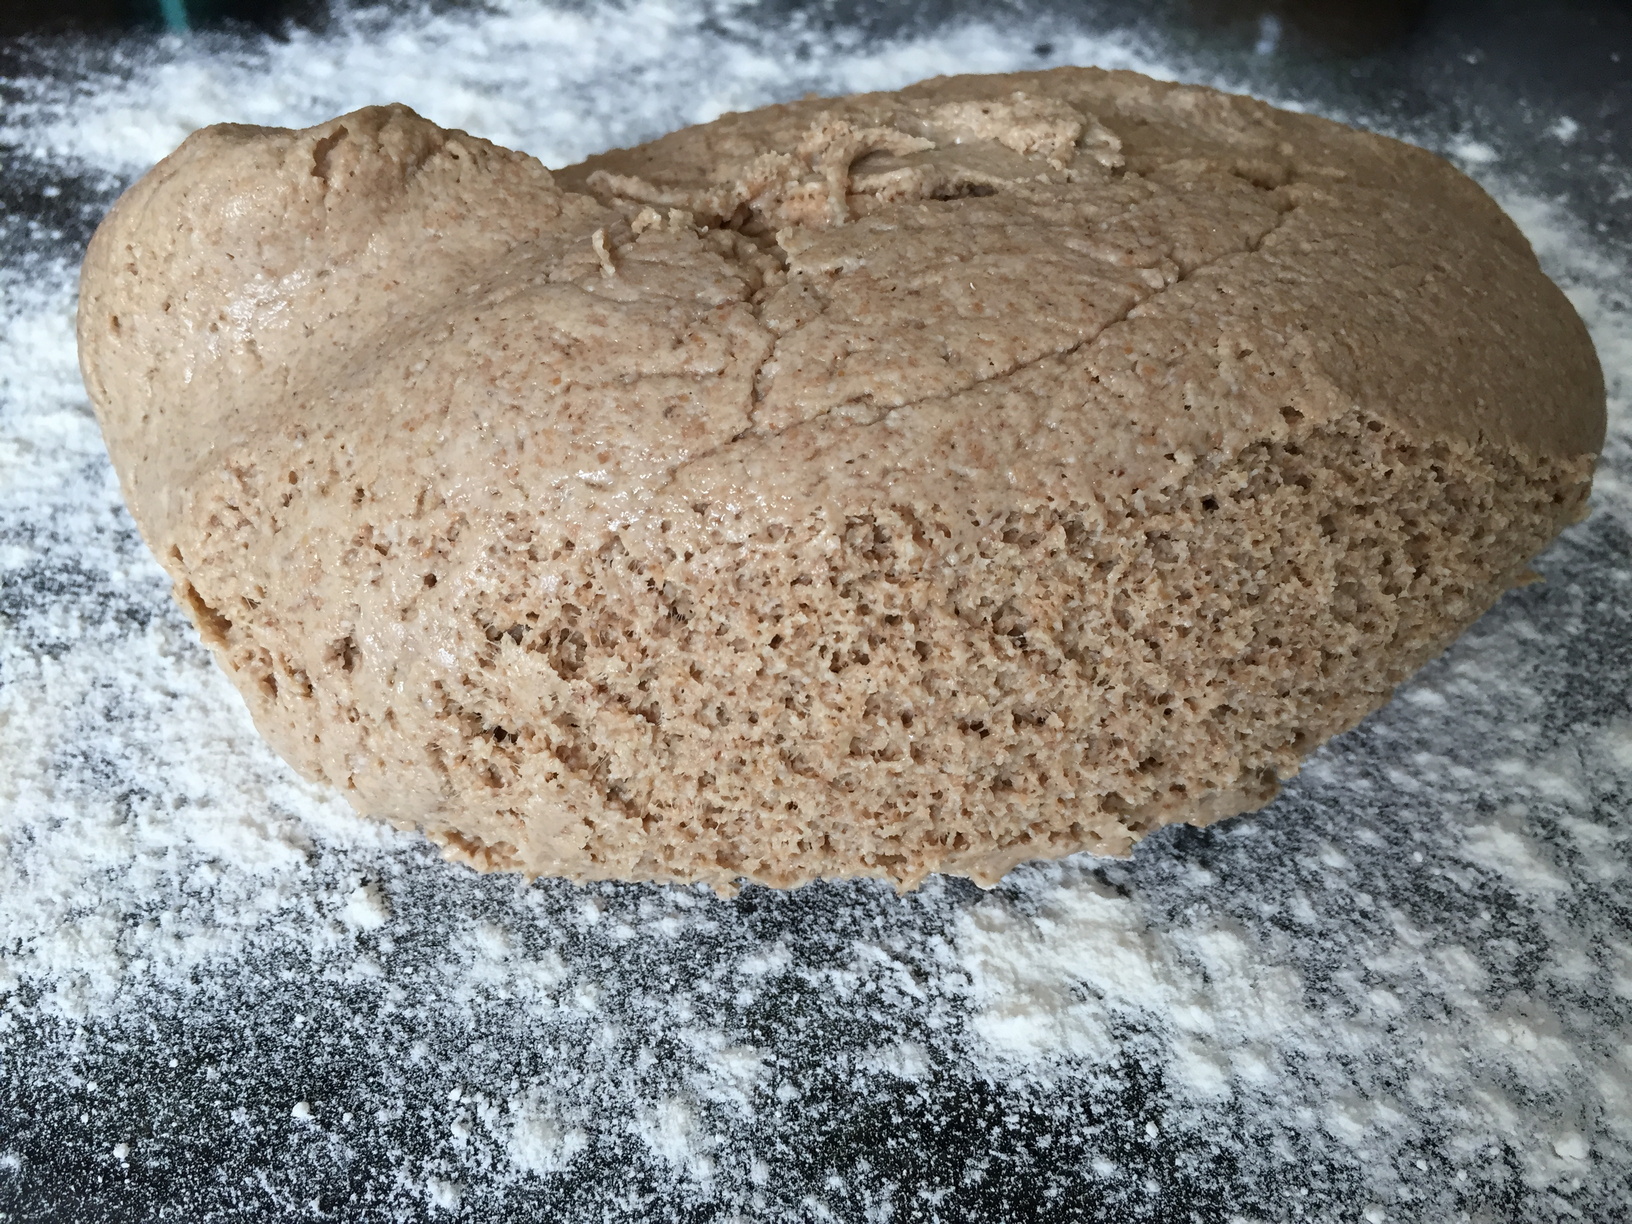 The dough after being left overnight, roughly 13 hours after being mixed